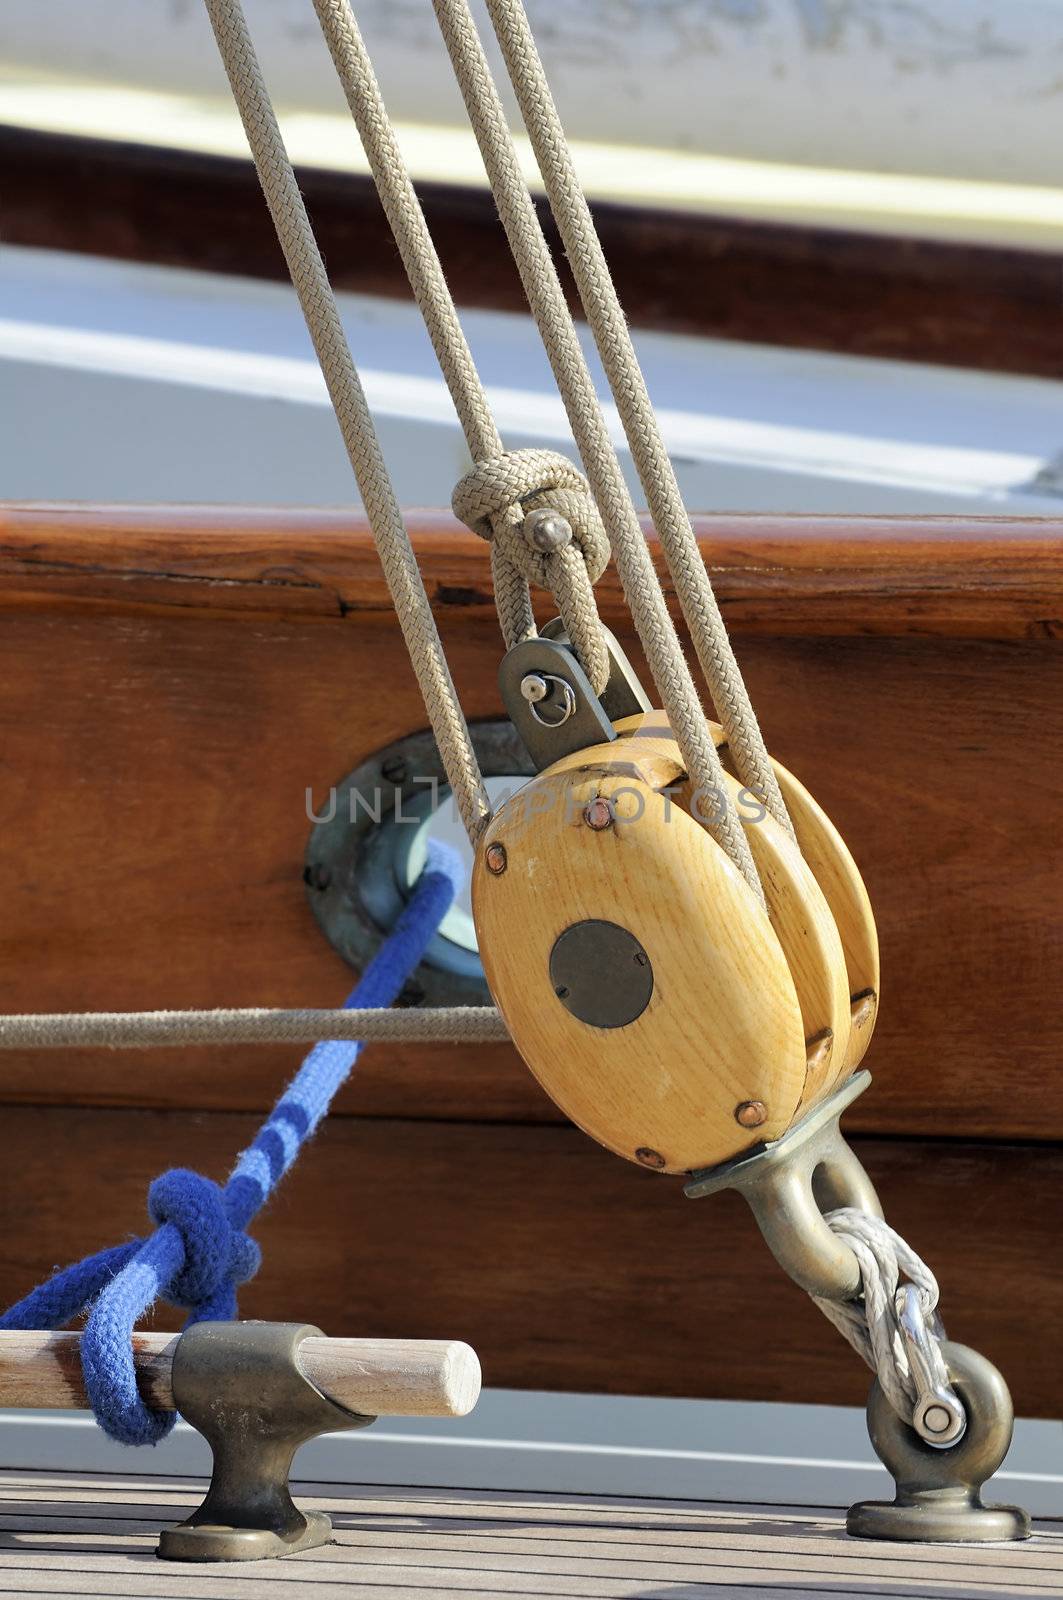 Detail of ropes and pulleys of a wooden sailboat